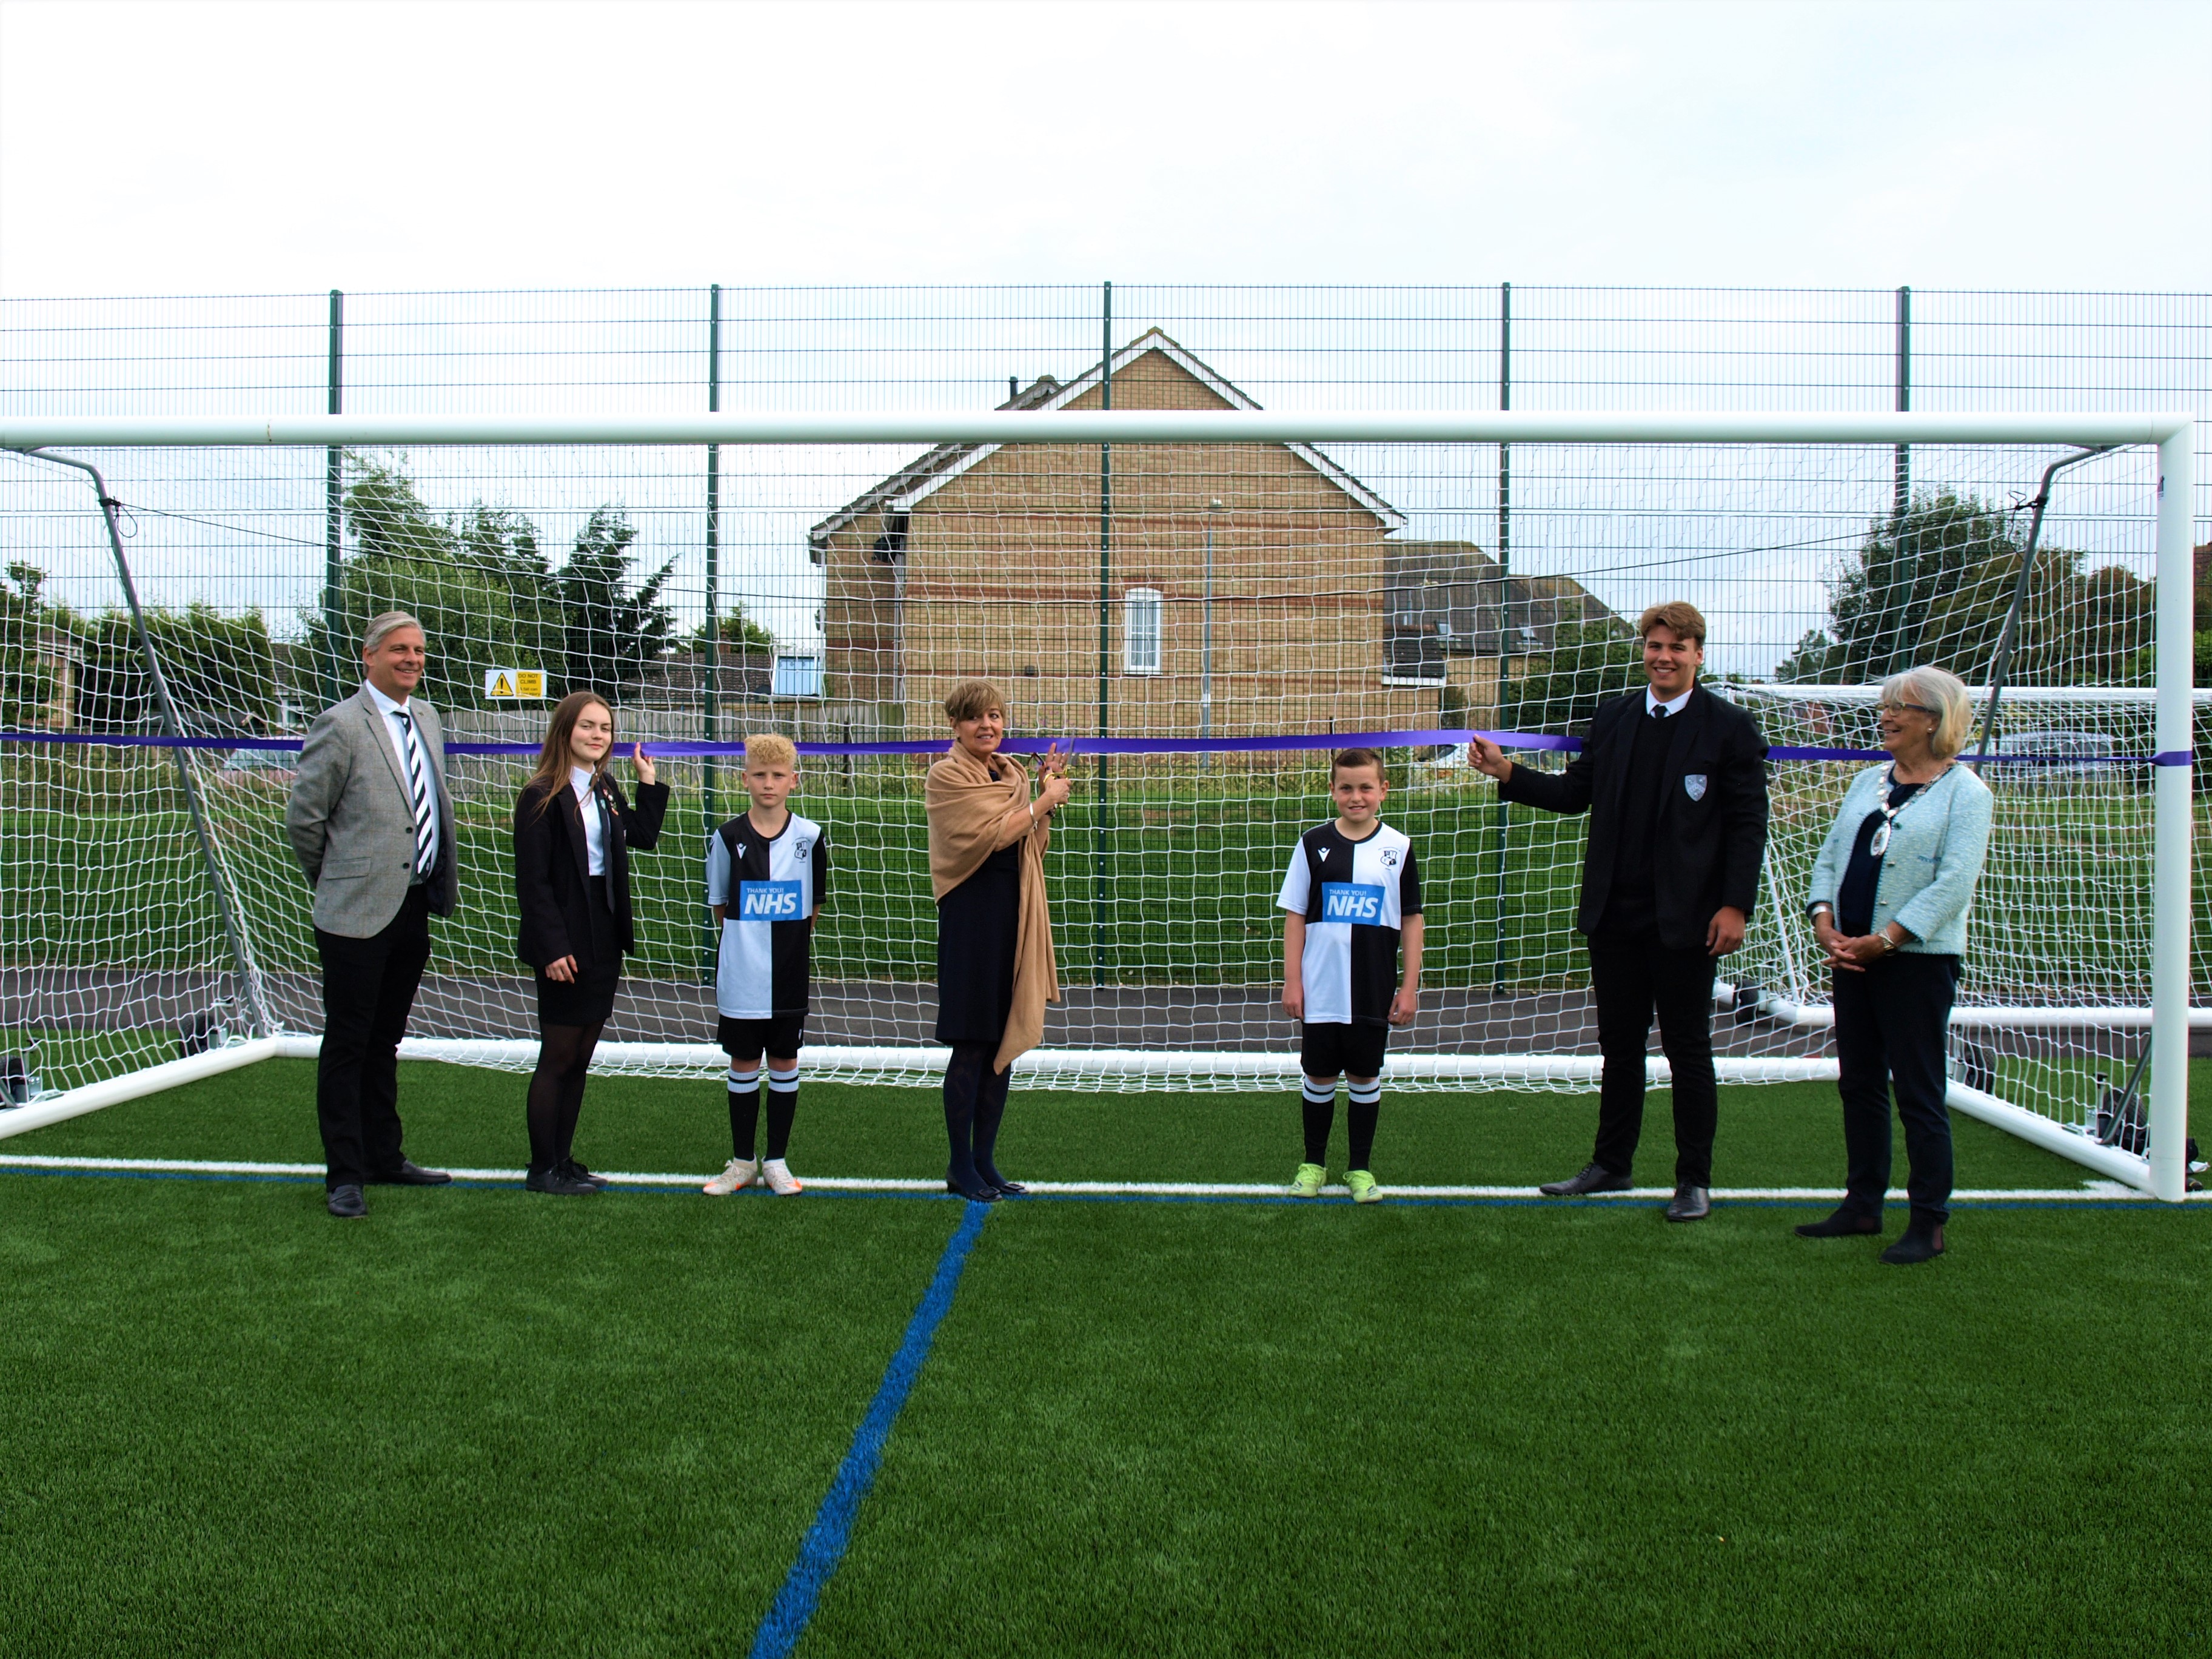 Lorraine Leys cuts ribbon on goal at Halstead artificial football pitch.